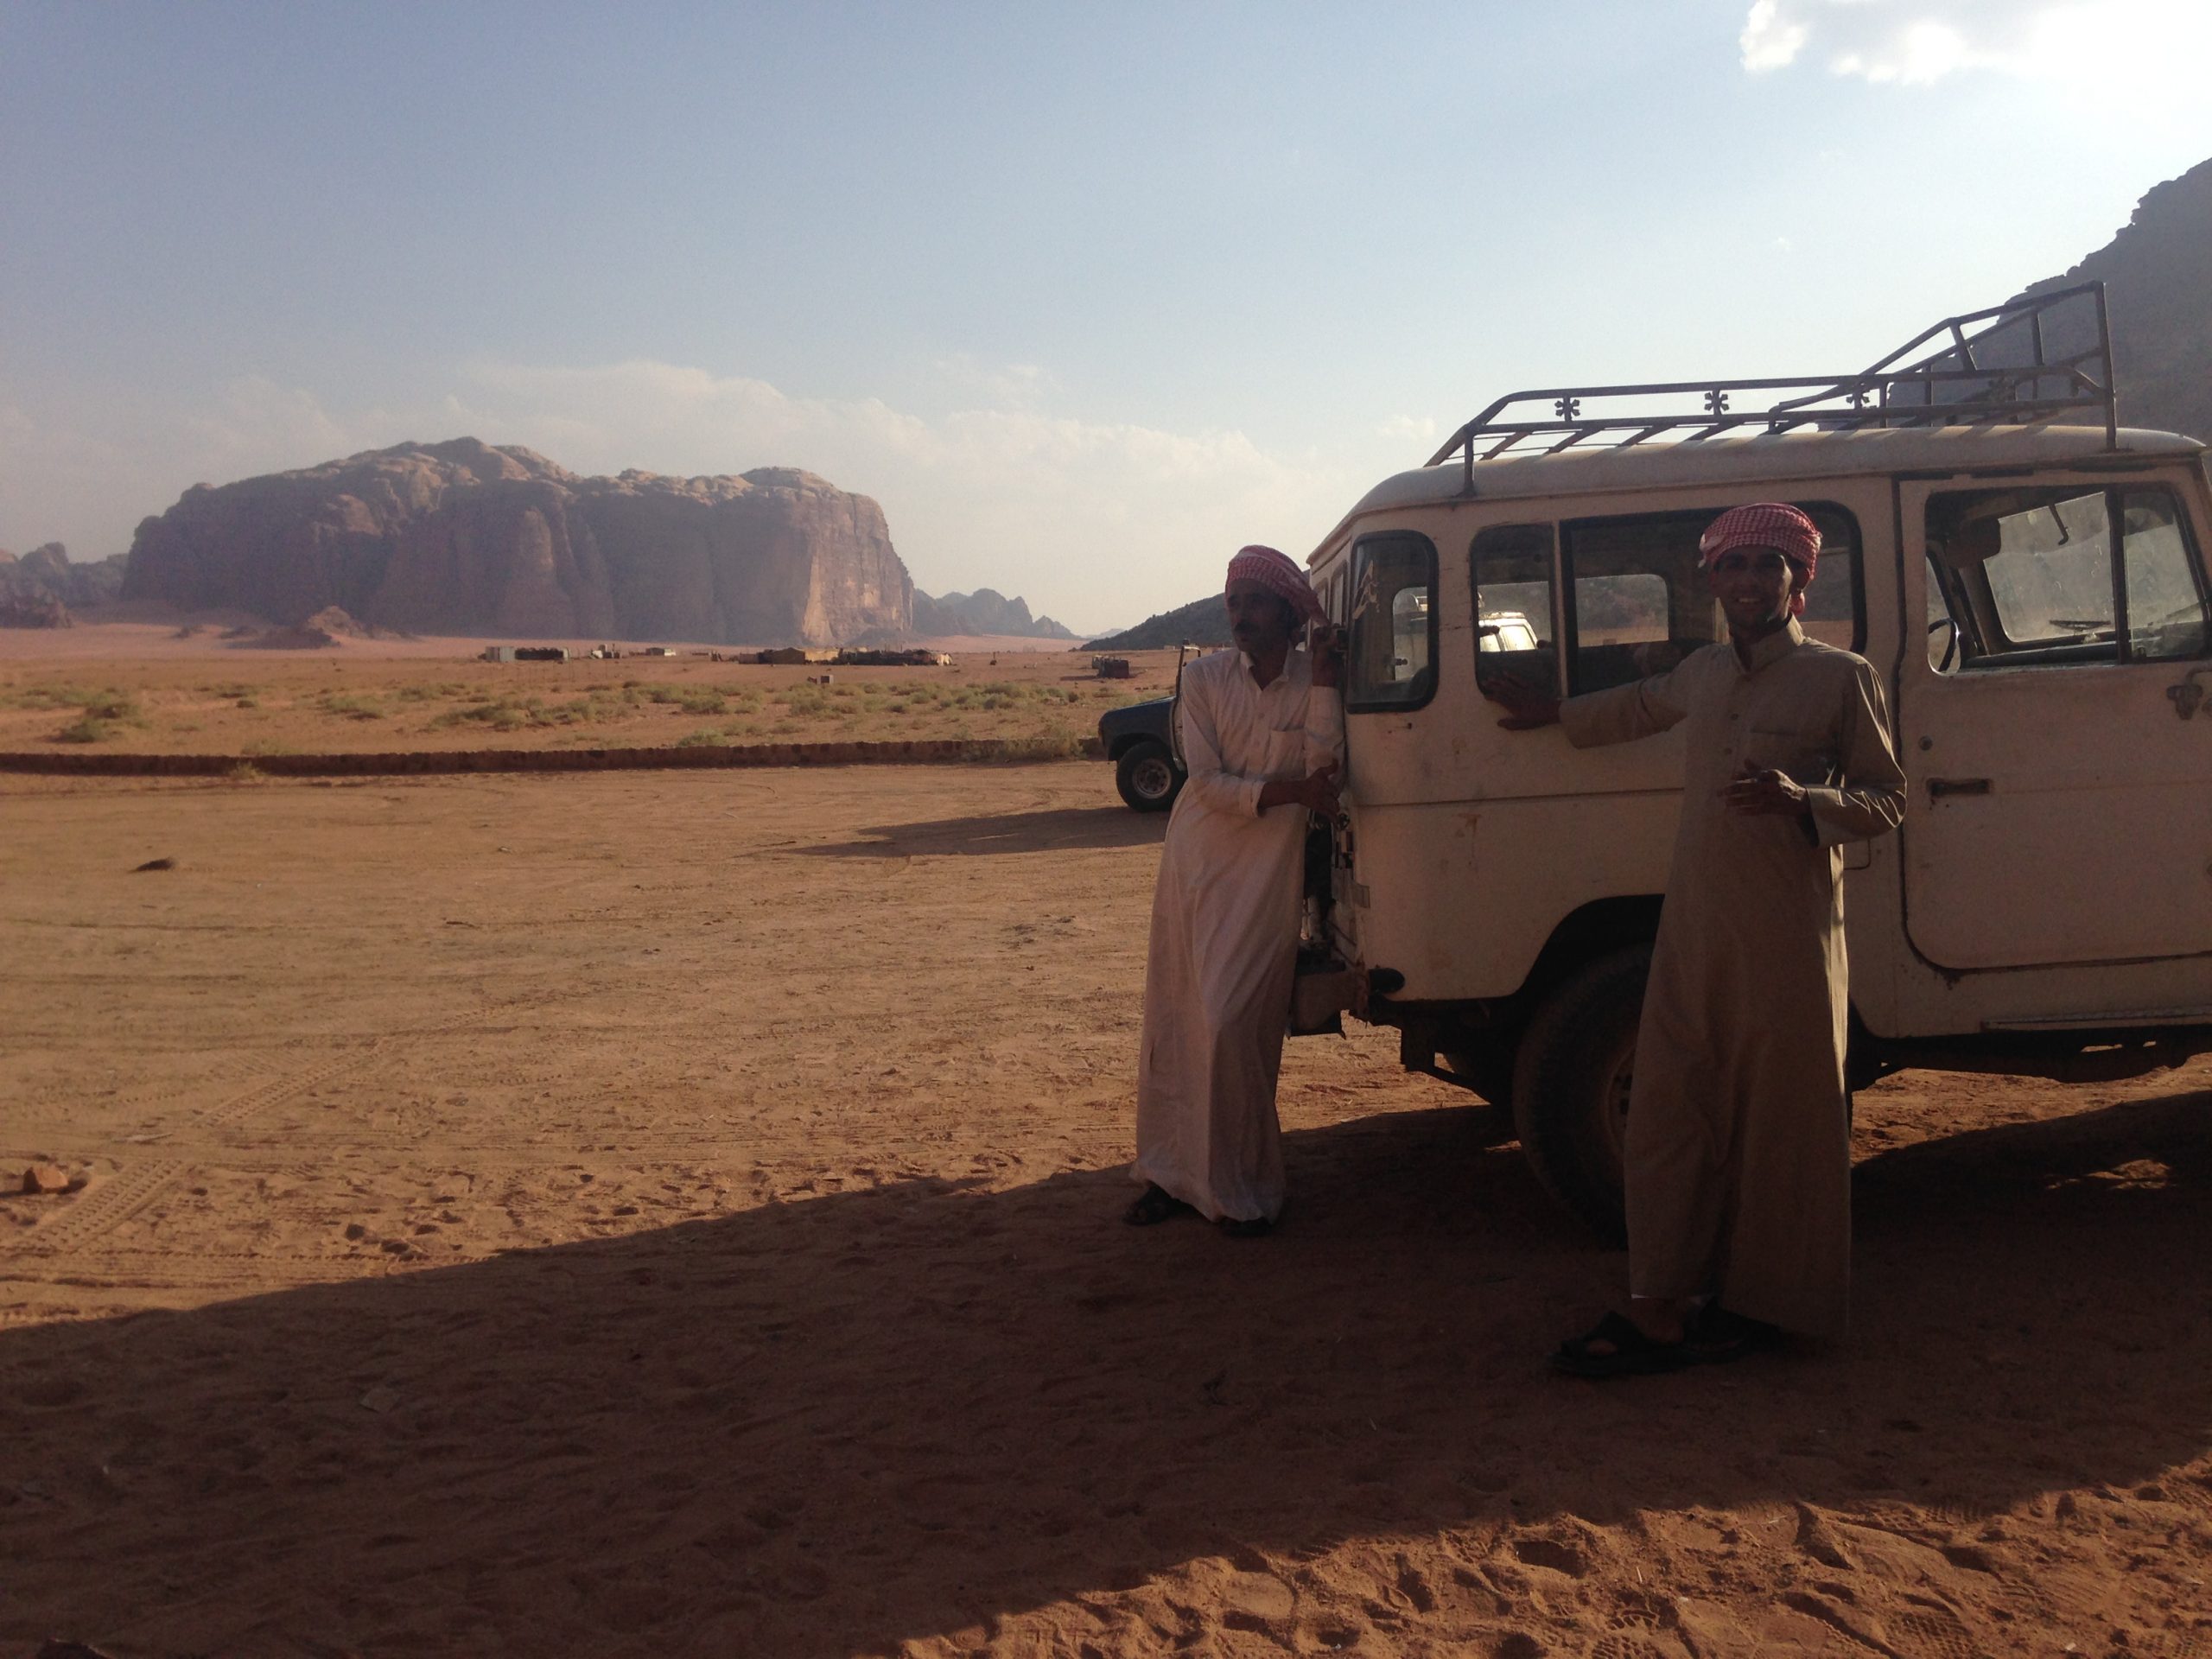 Two Bedouins wearing traditional Bedouin clothes in the Wadi Rum desert. Photo by Camilla Toftlund.